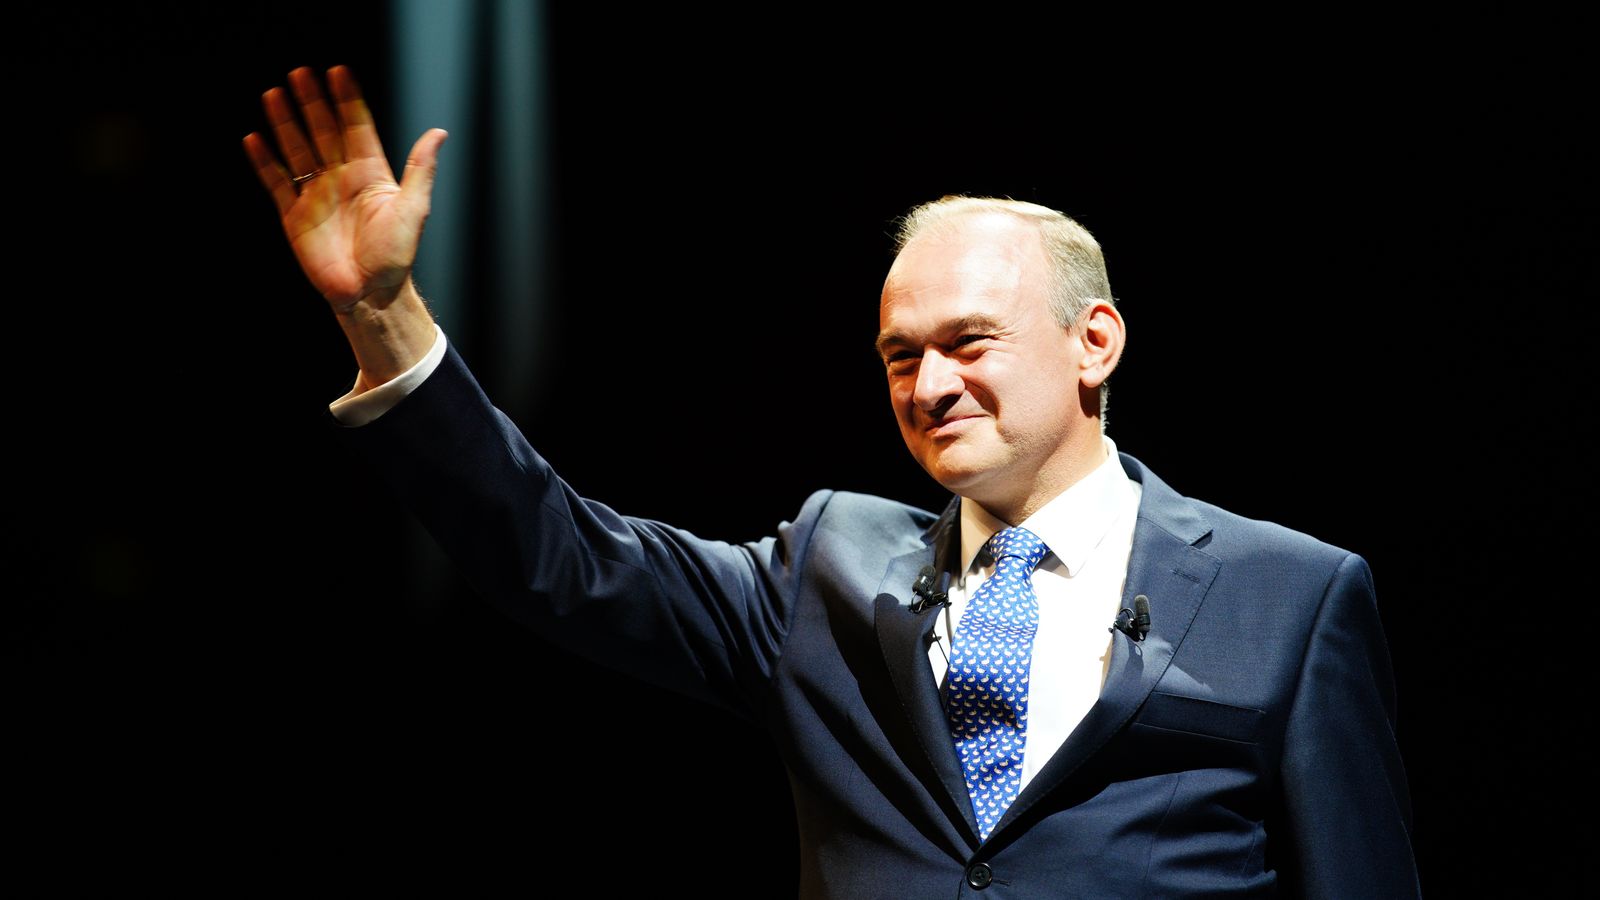 Liberal Democrat conference: Sir Ed Davey pledges two-month cancer treatment guarantee in closing speech